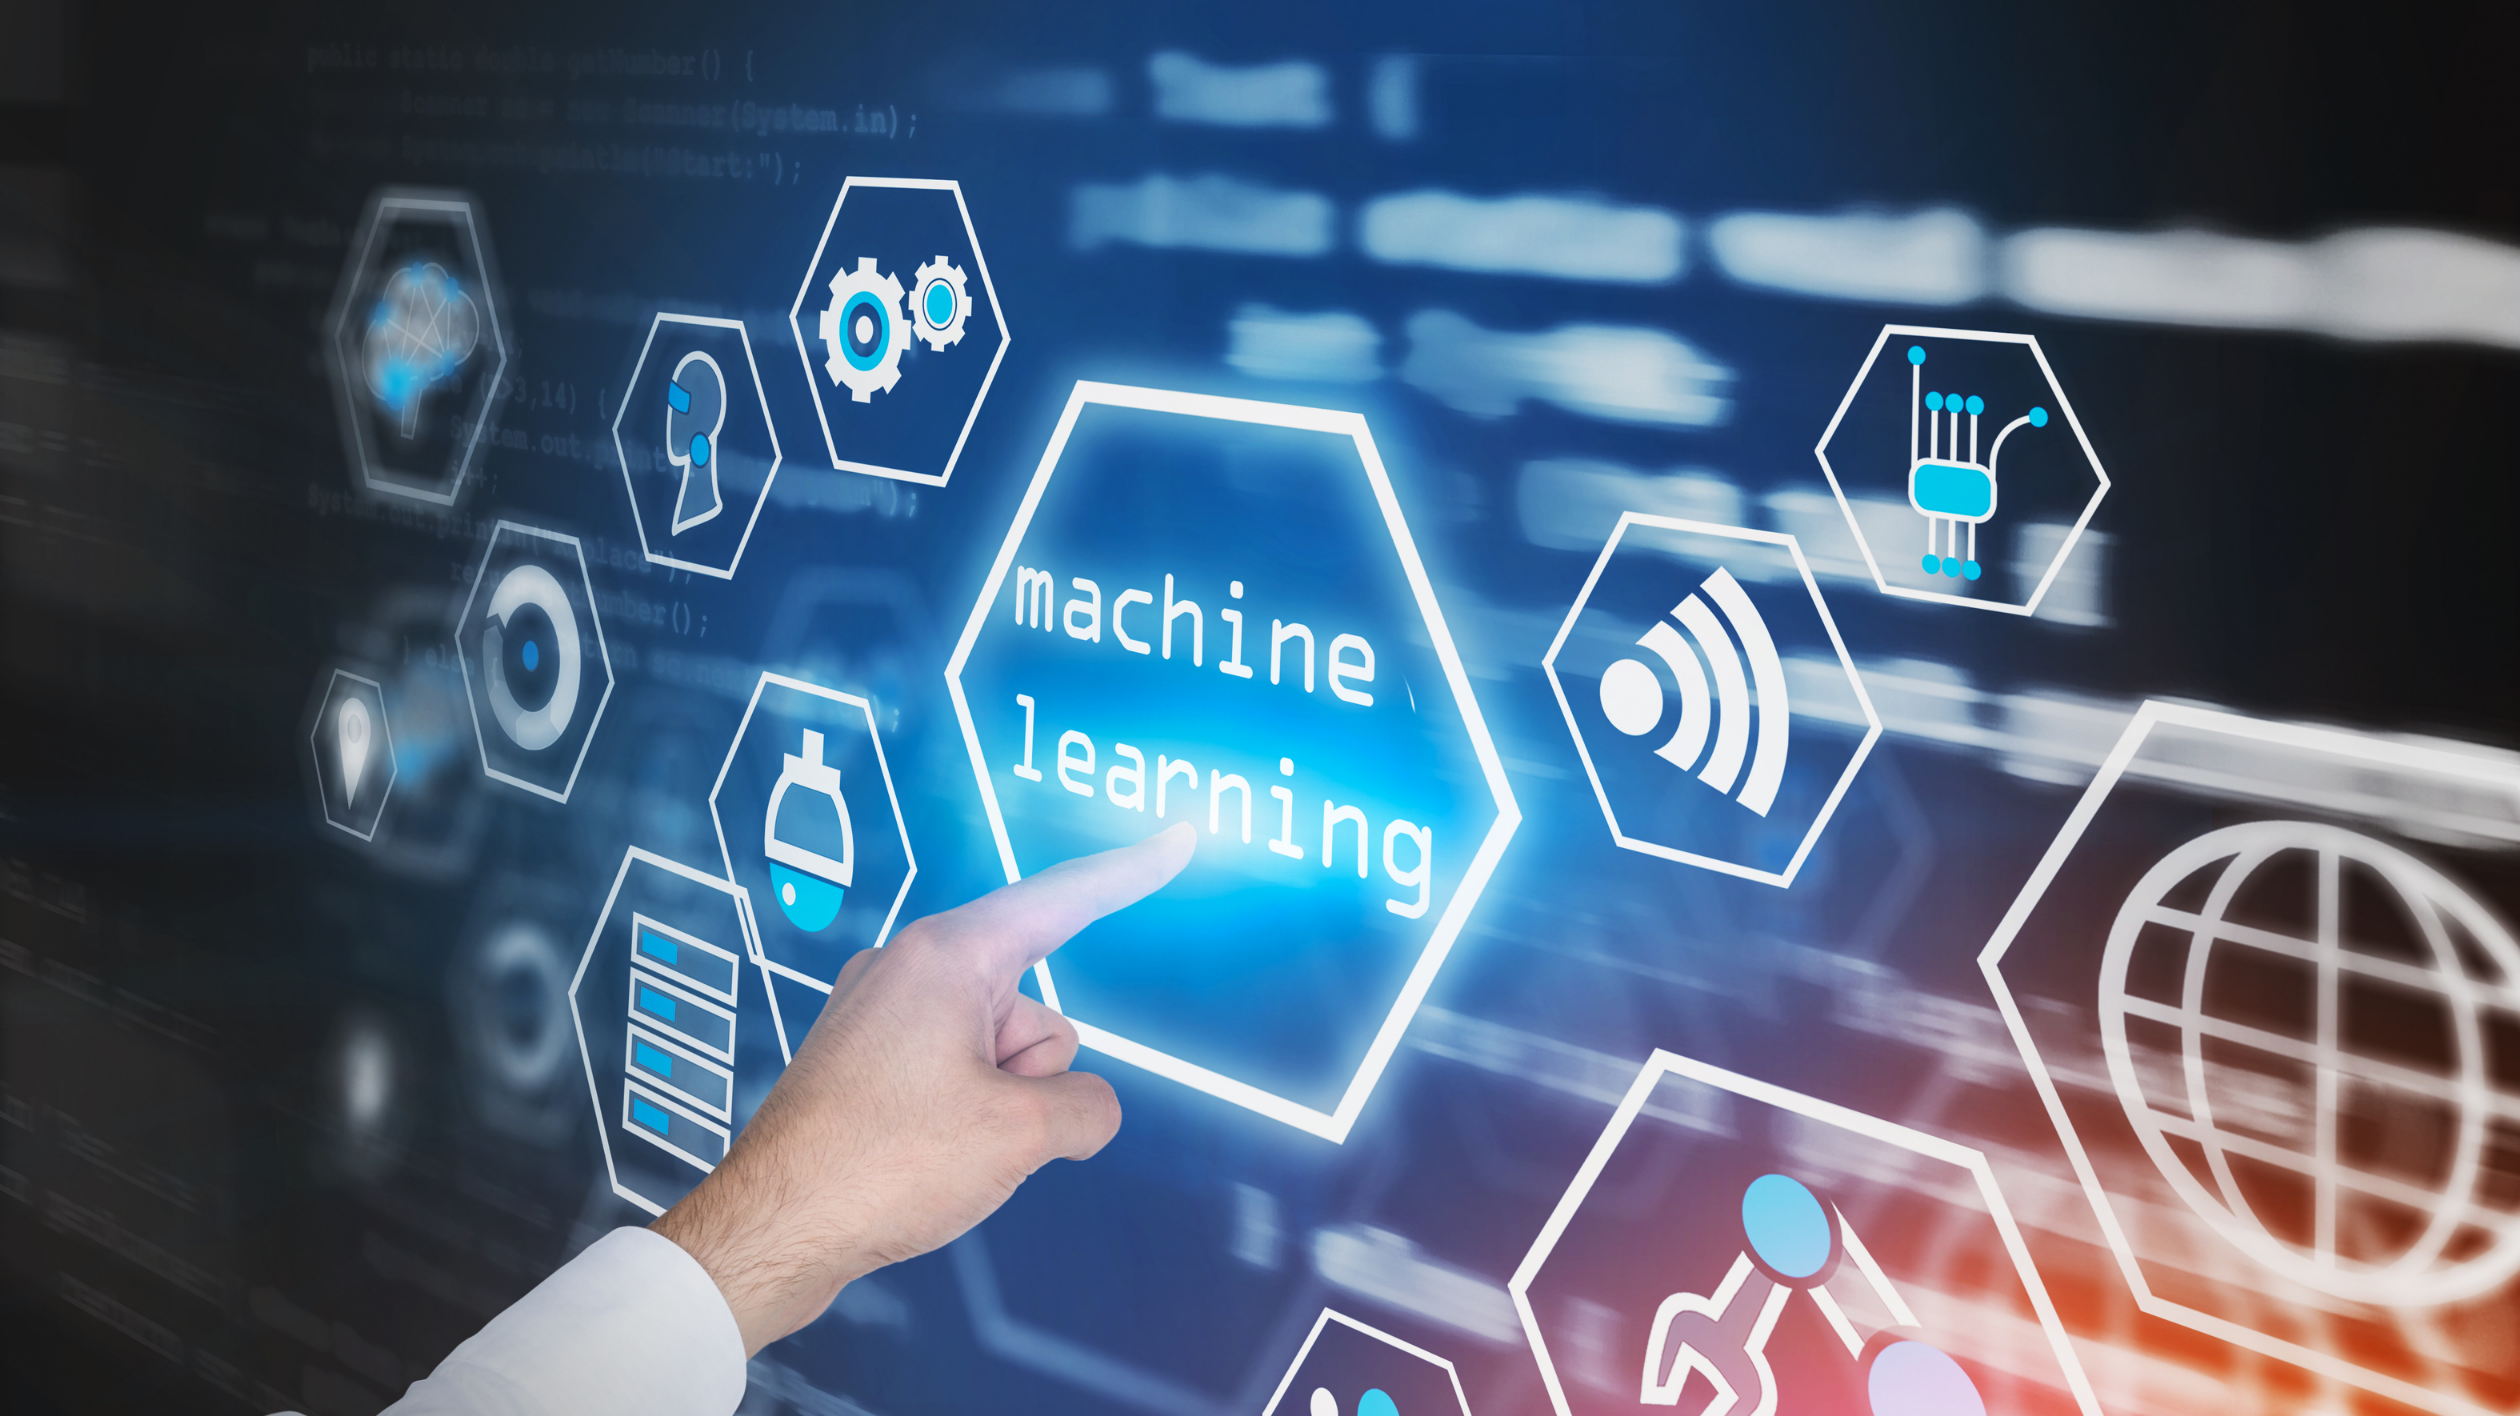 what is machine learning?